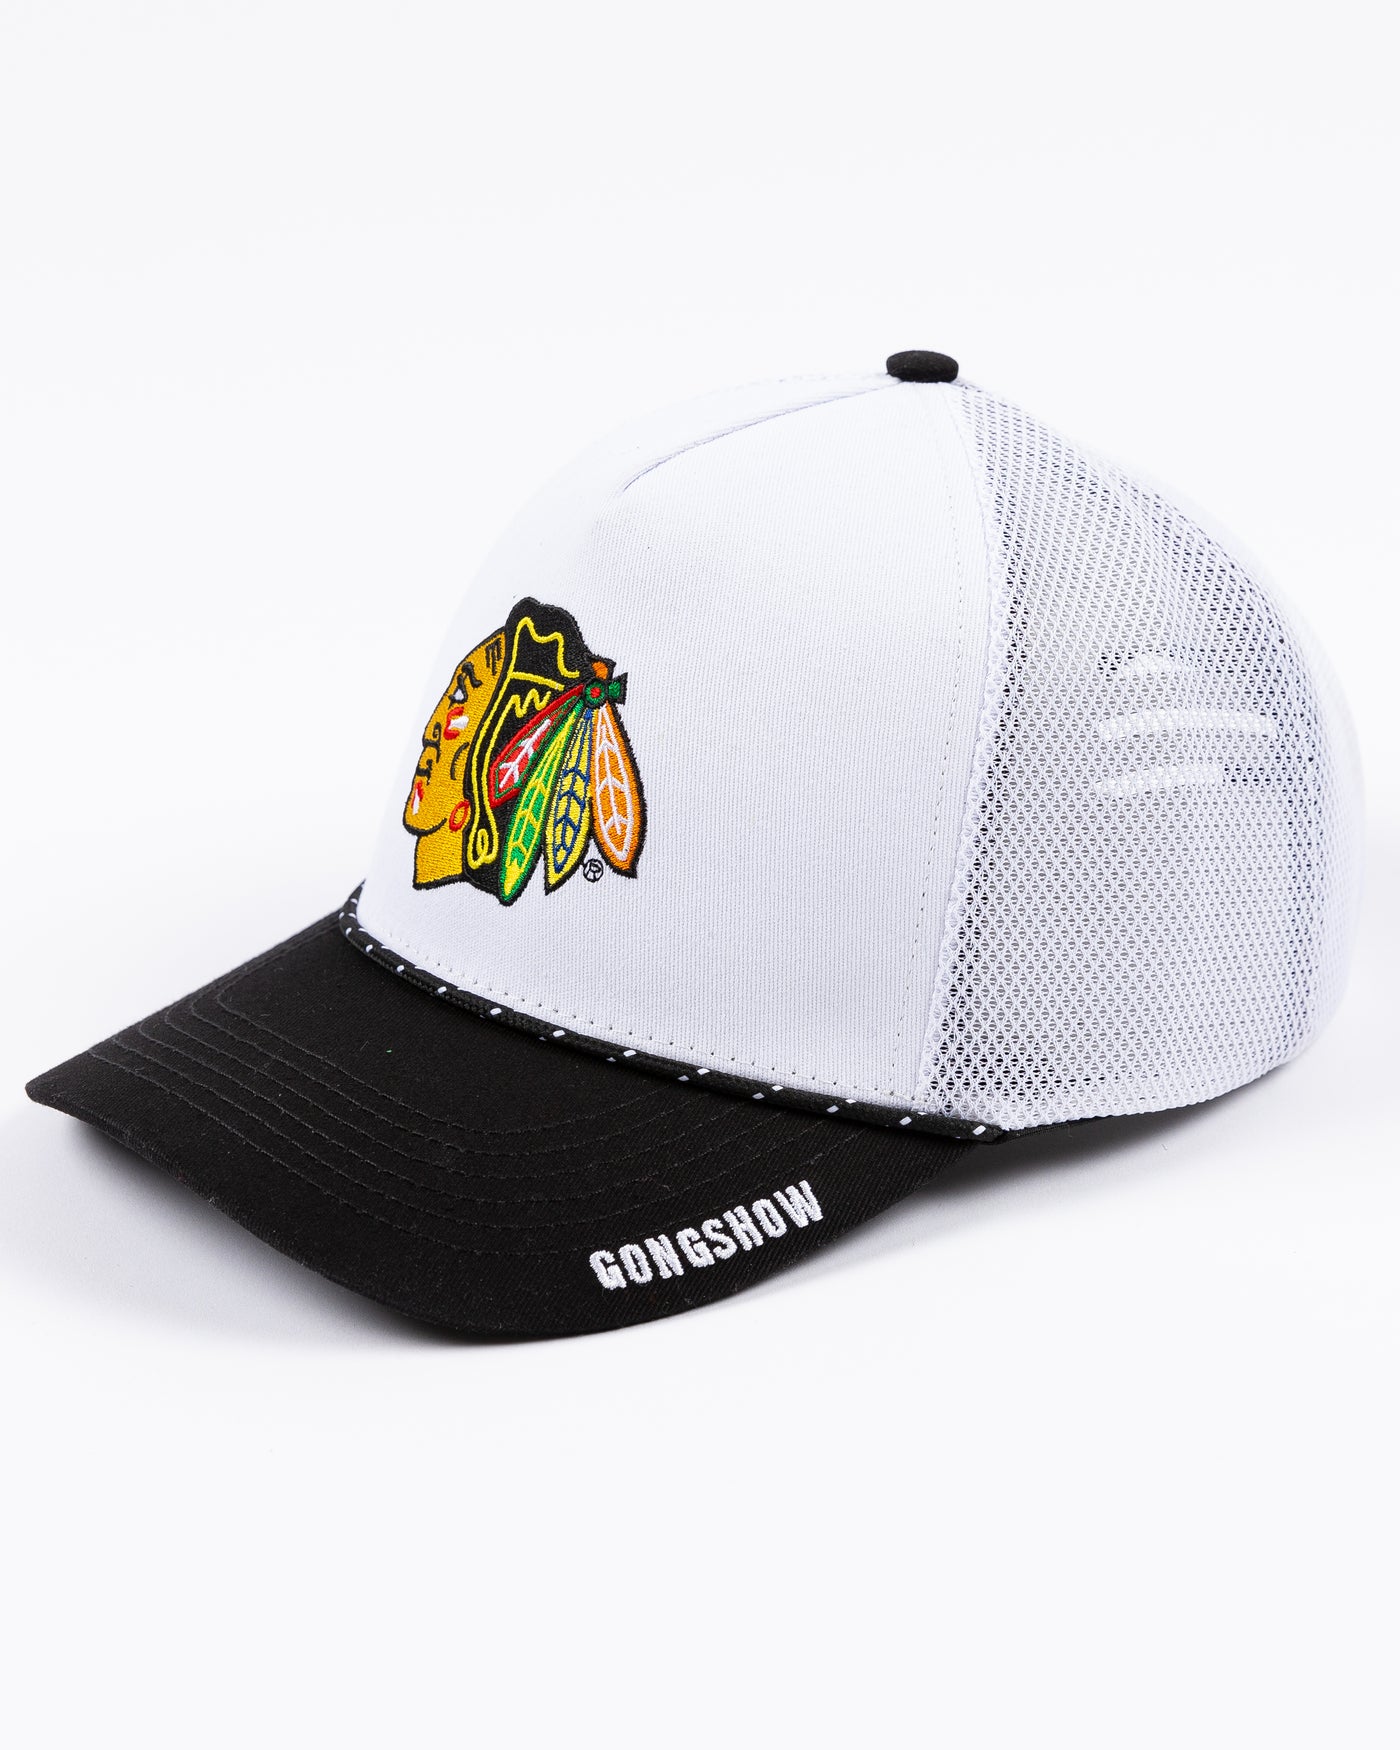 two tone black and white Gongshow trucker hat with rope detail and Chicago Blackhawks primary logo embroidered on the front - left angle lay flat